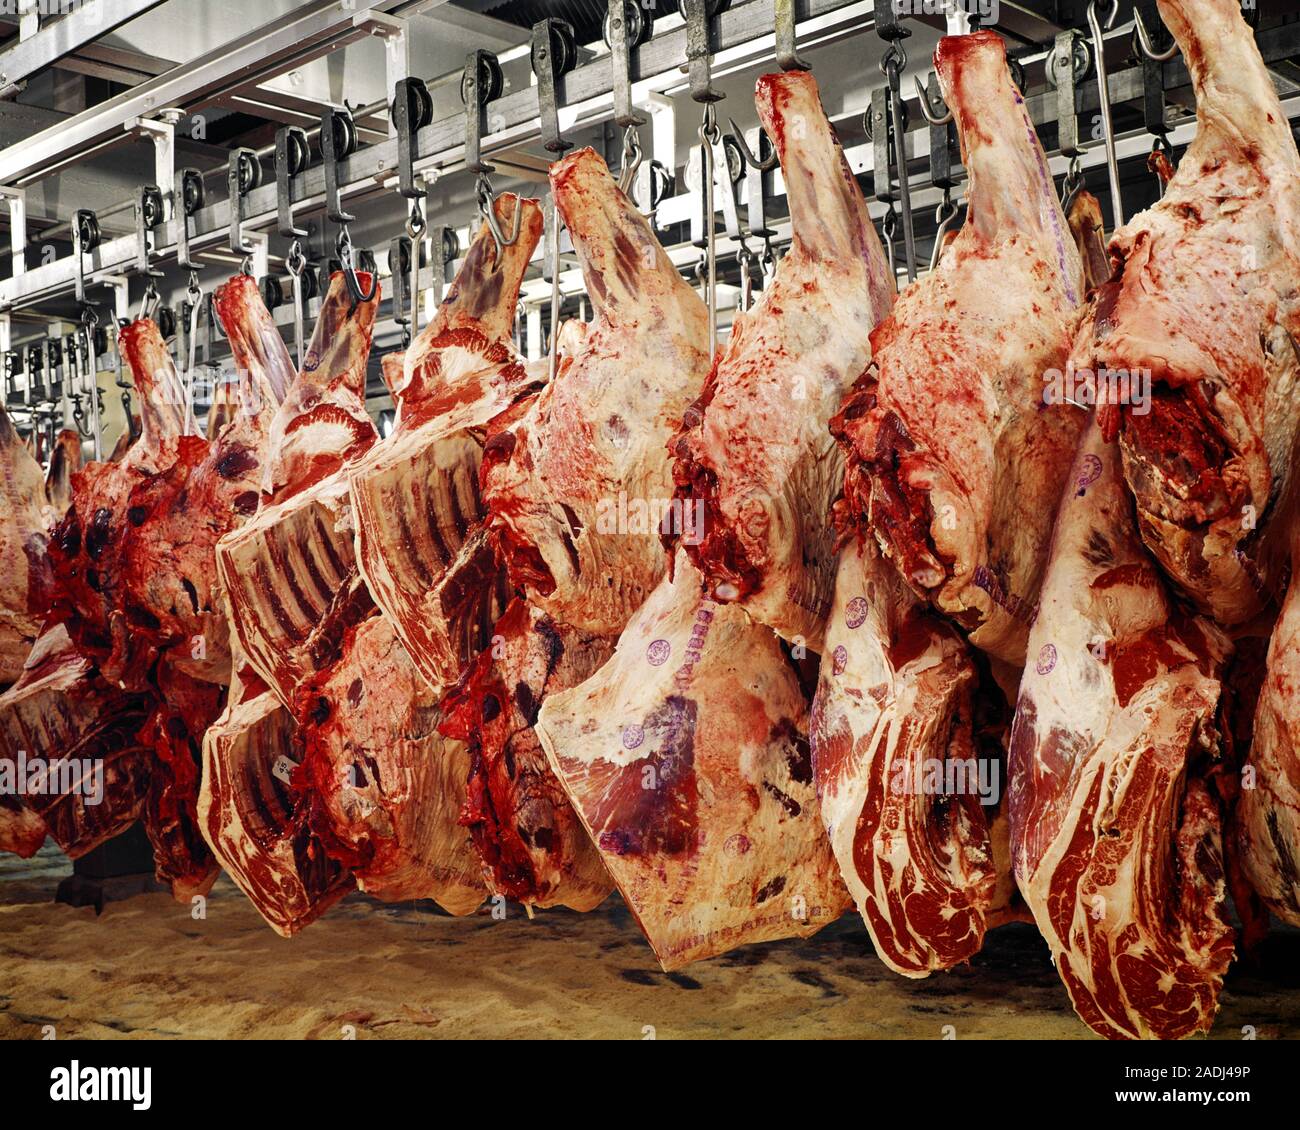 1970s SIDES OF BEEF RAW DRESSED CARCASSES HANGING IN WAREHOUSE MEAT COOLER - kf6219 HAR001 HARS OLD FASHIONED Stock Photo